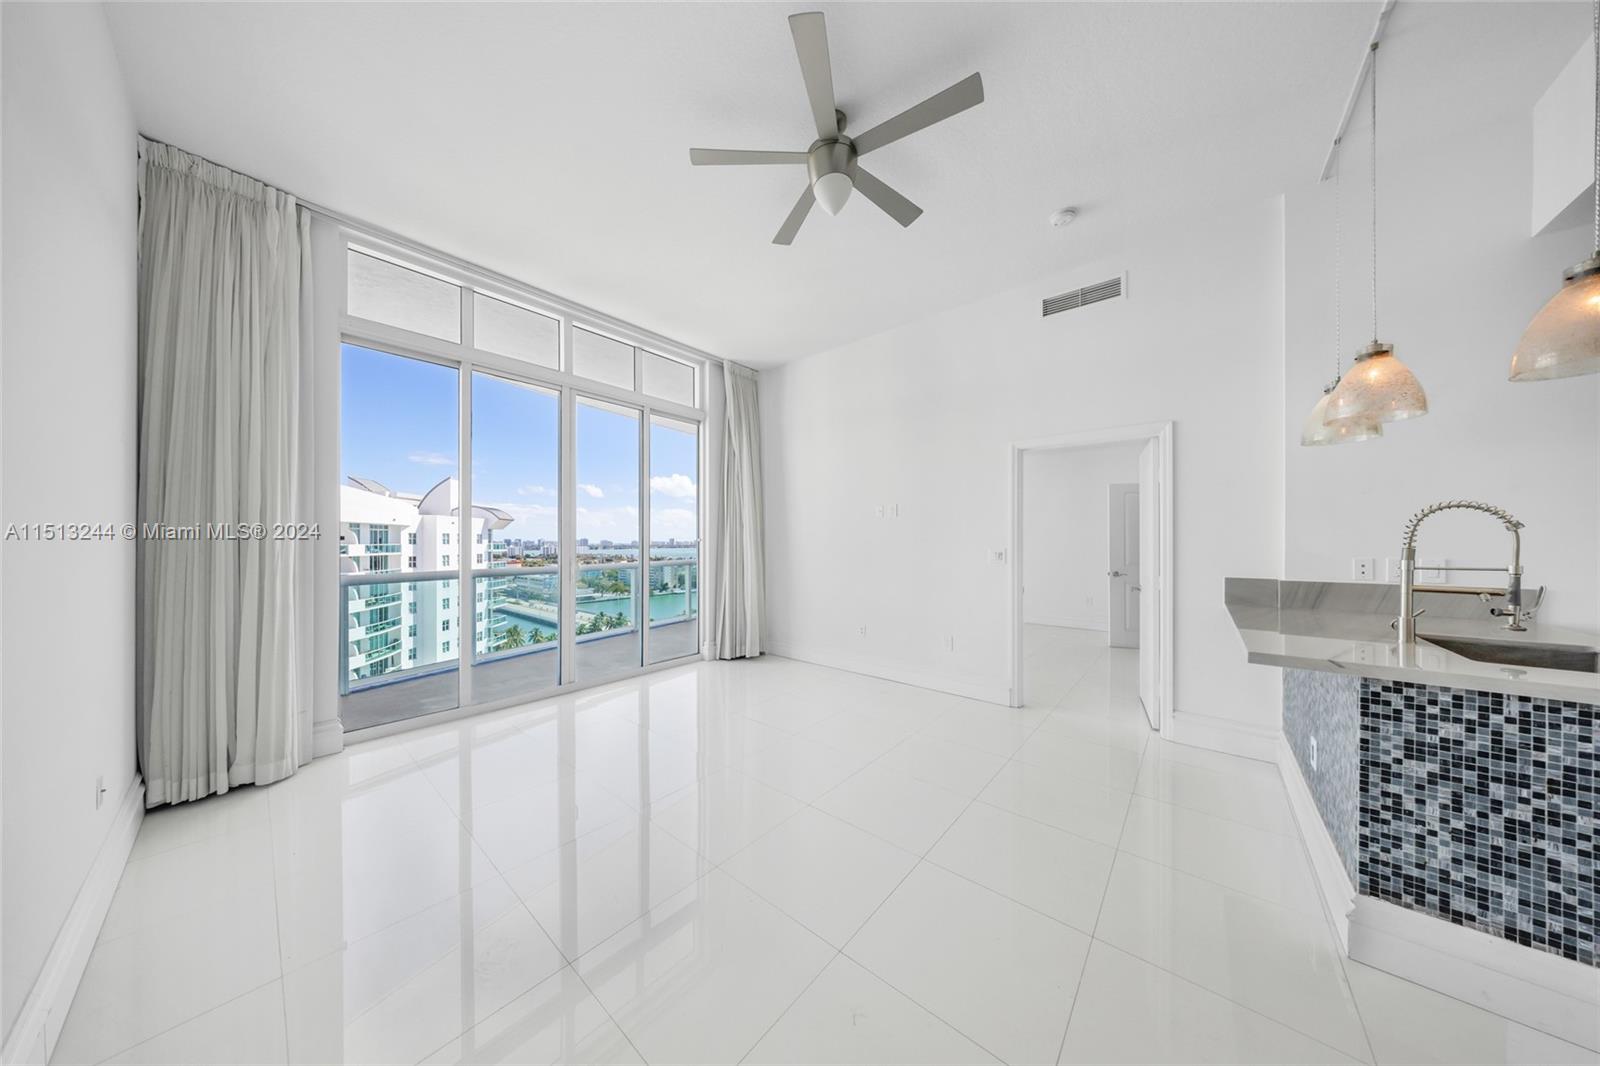 Gorgeous 2 bed & 2 bath Penthouse in North Bay Village!!! This amazing unit features 10 ft ceiling, white marble flooring throughout the entire unit, glass sliding doors to enjoy beautiful intracoastal & pool views from the balcony which is accessible from the living room & master bedroom allowing plenty of natural light to come in. Open kitchen with Italian cabinetry & brand new stainless steel appliances and washer and dryer. Master Bathroom offers stand up shower & roman tub. This unit also comes with 2 assigned garage spaces. The 360 condominium offers a variety of amenities like Gym, sauna, pool, & Jacuzzi access. MUST SEE !!!